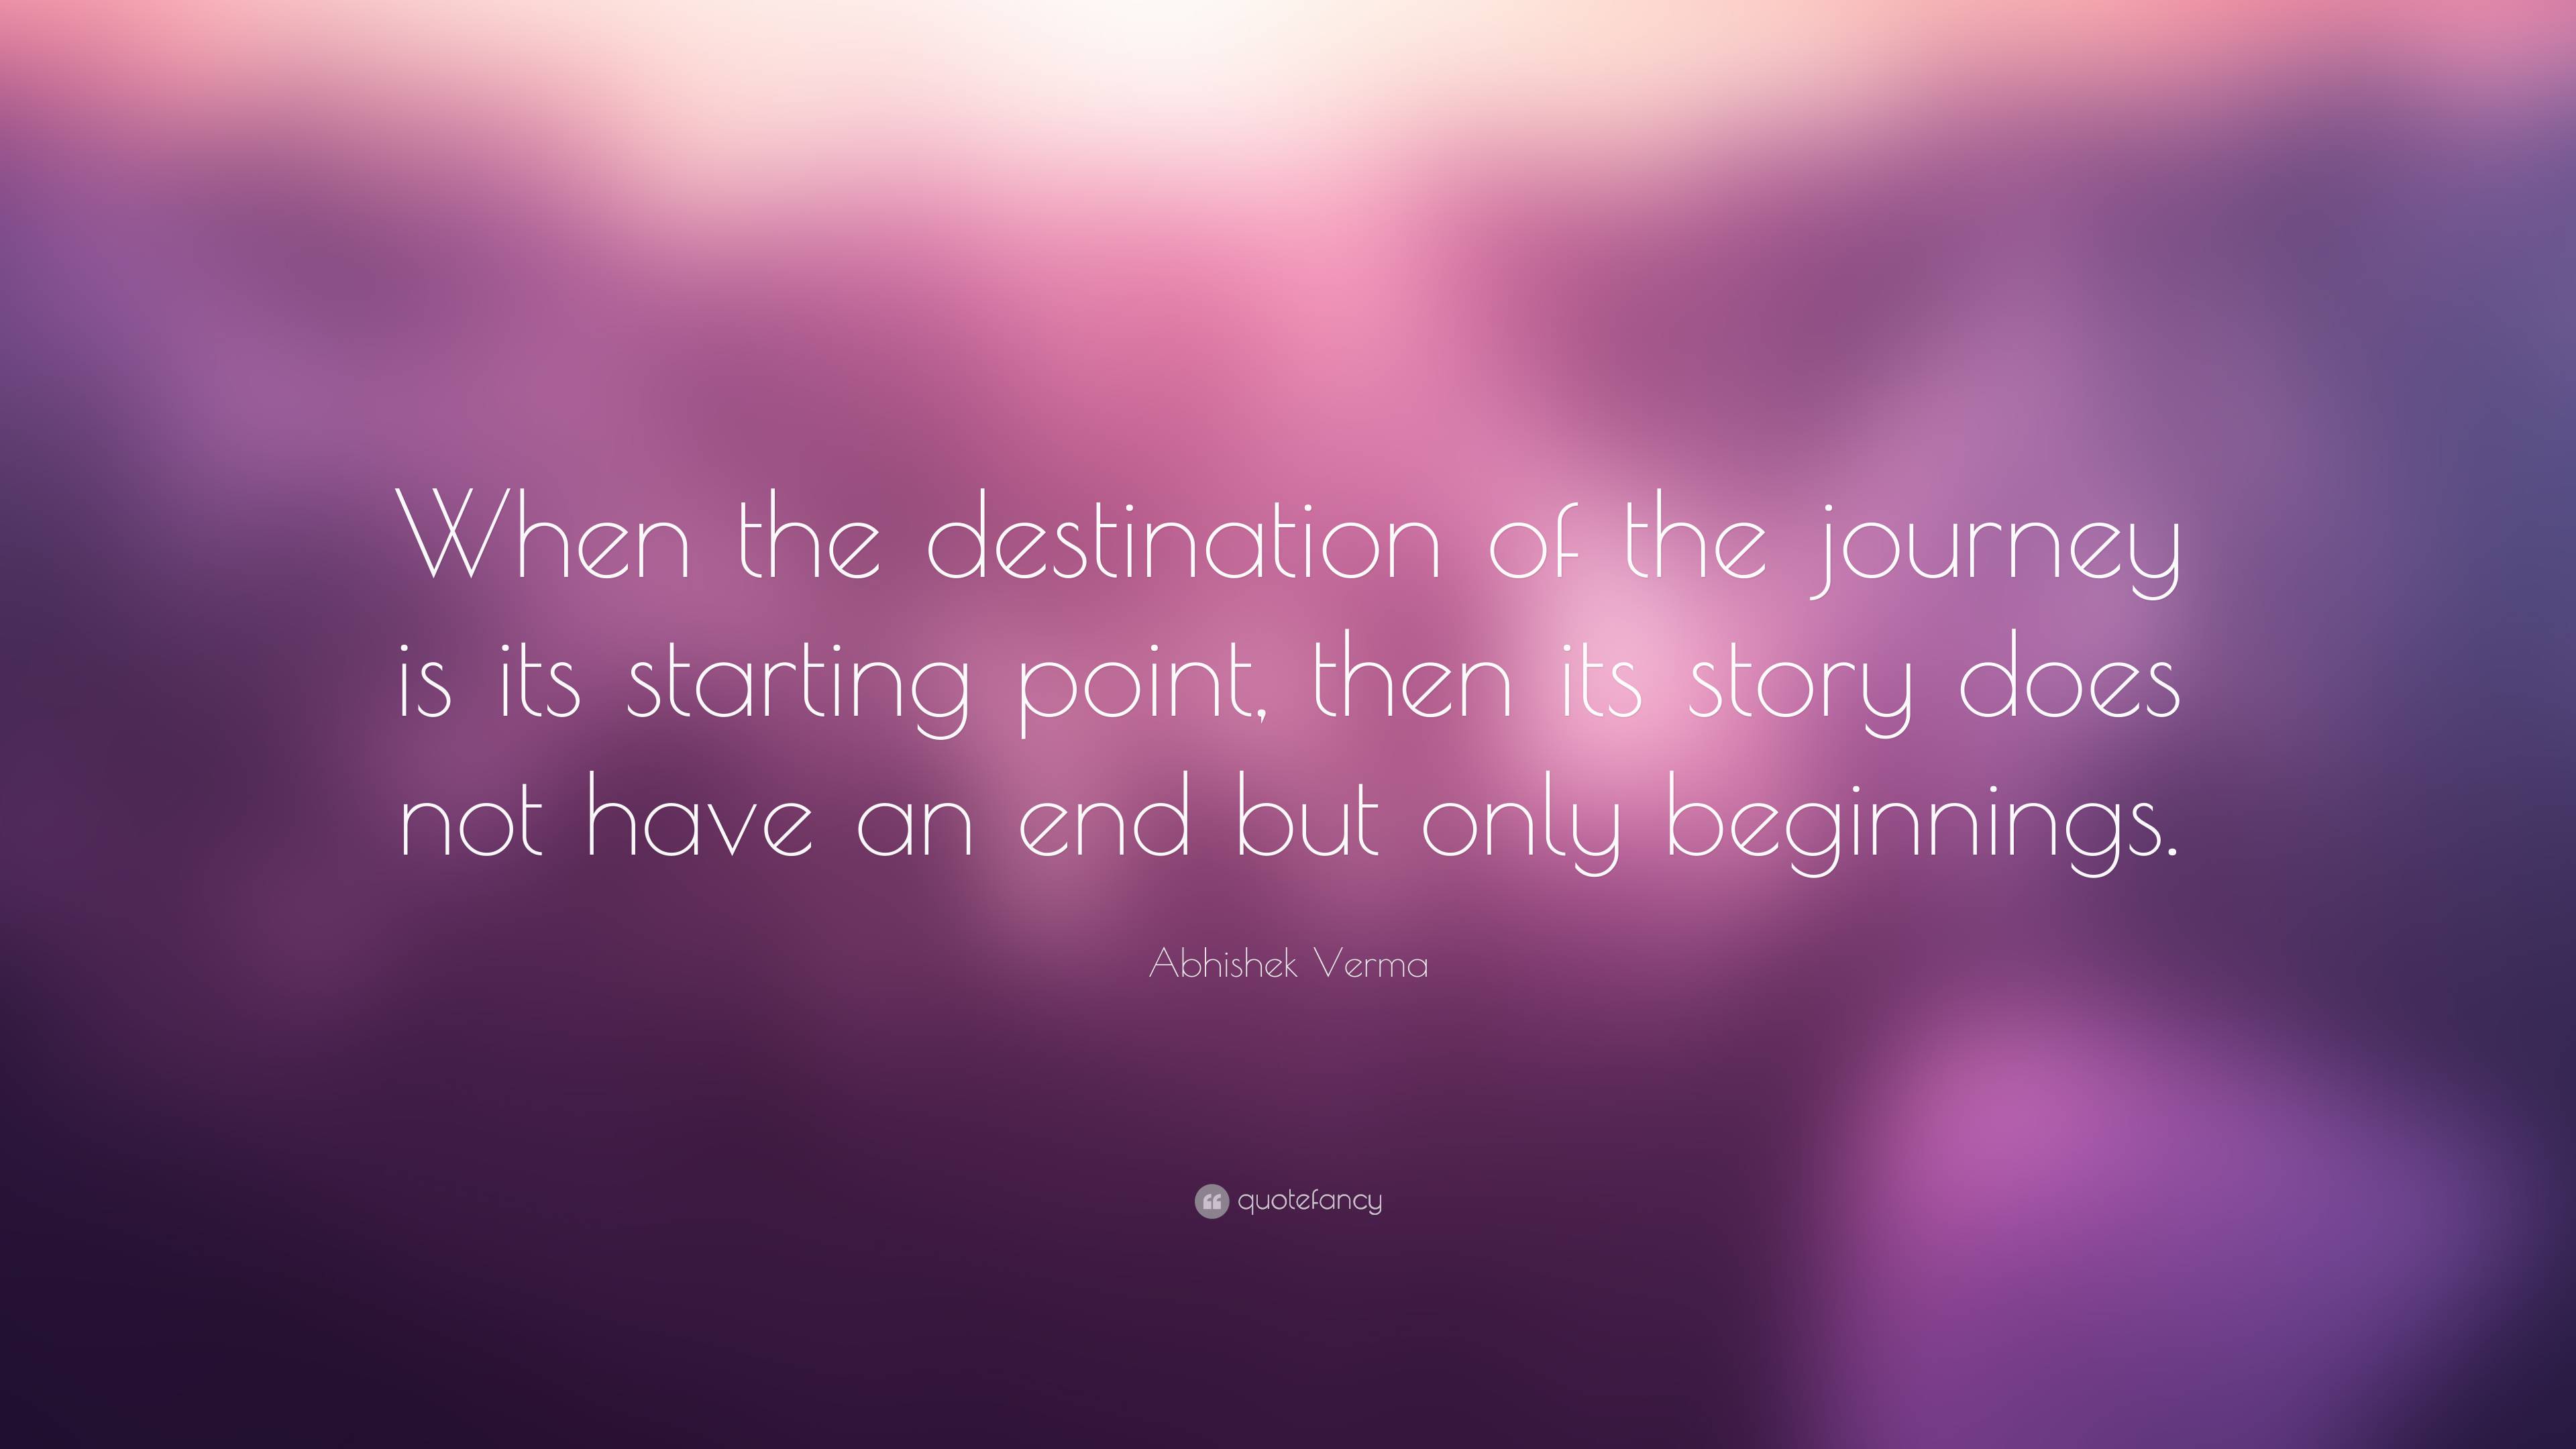 Abhishek Verma Quote: “When the destination of the journey is its ...